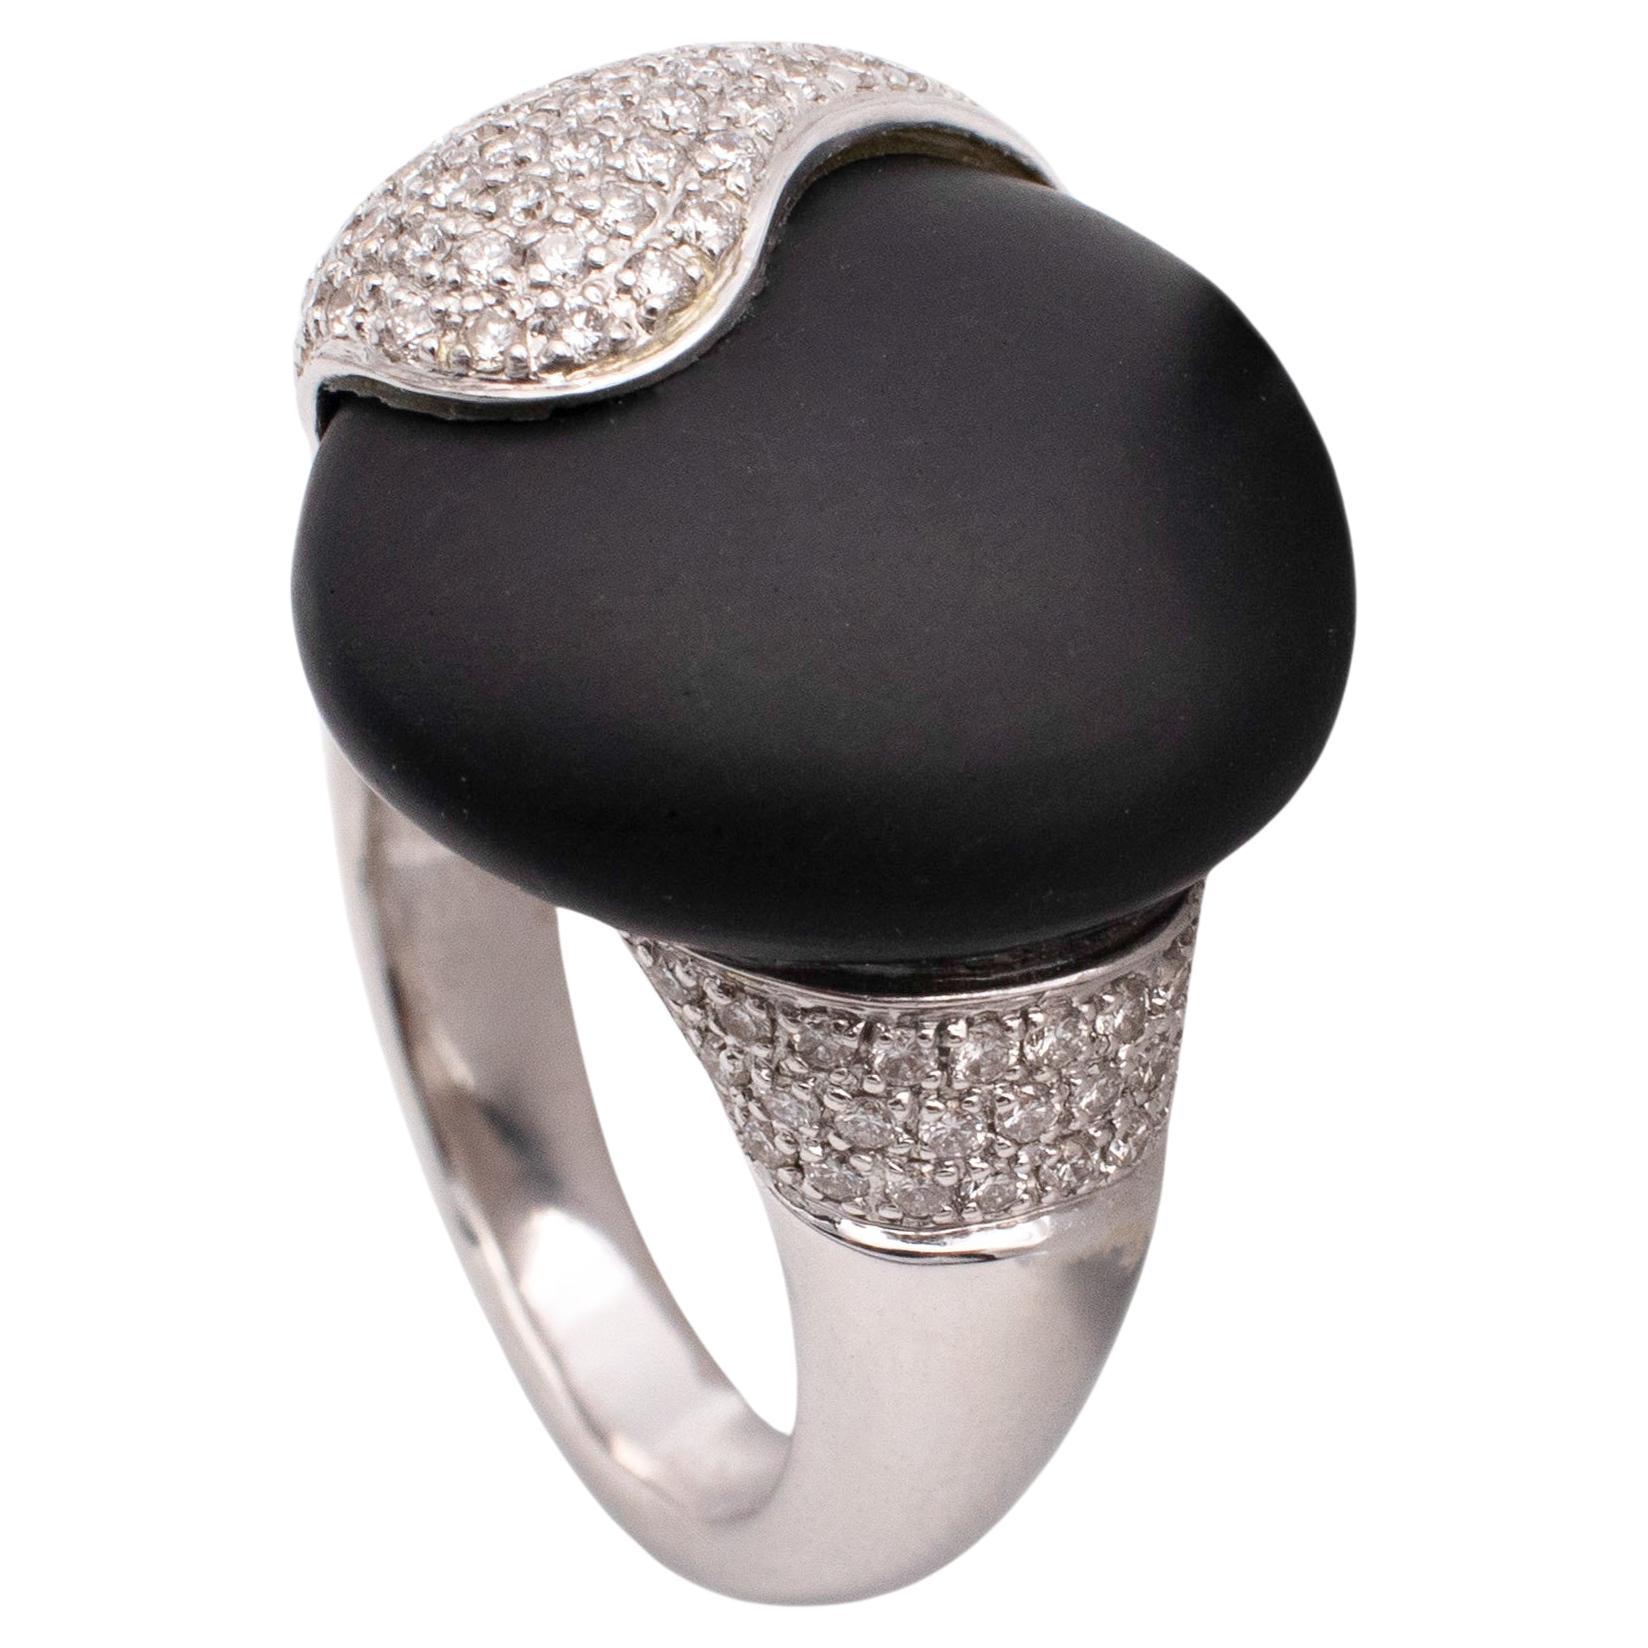 Meister of Zurich 18kt White Gold Ring with VS Diamonds and Frosted Black Onyx